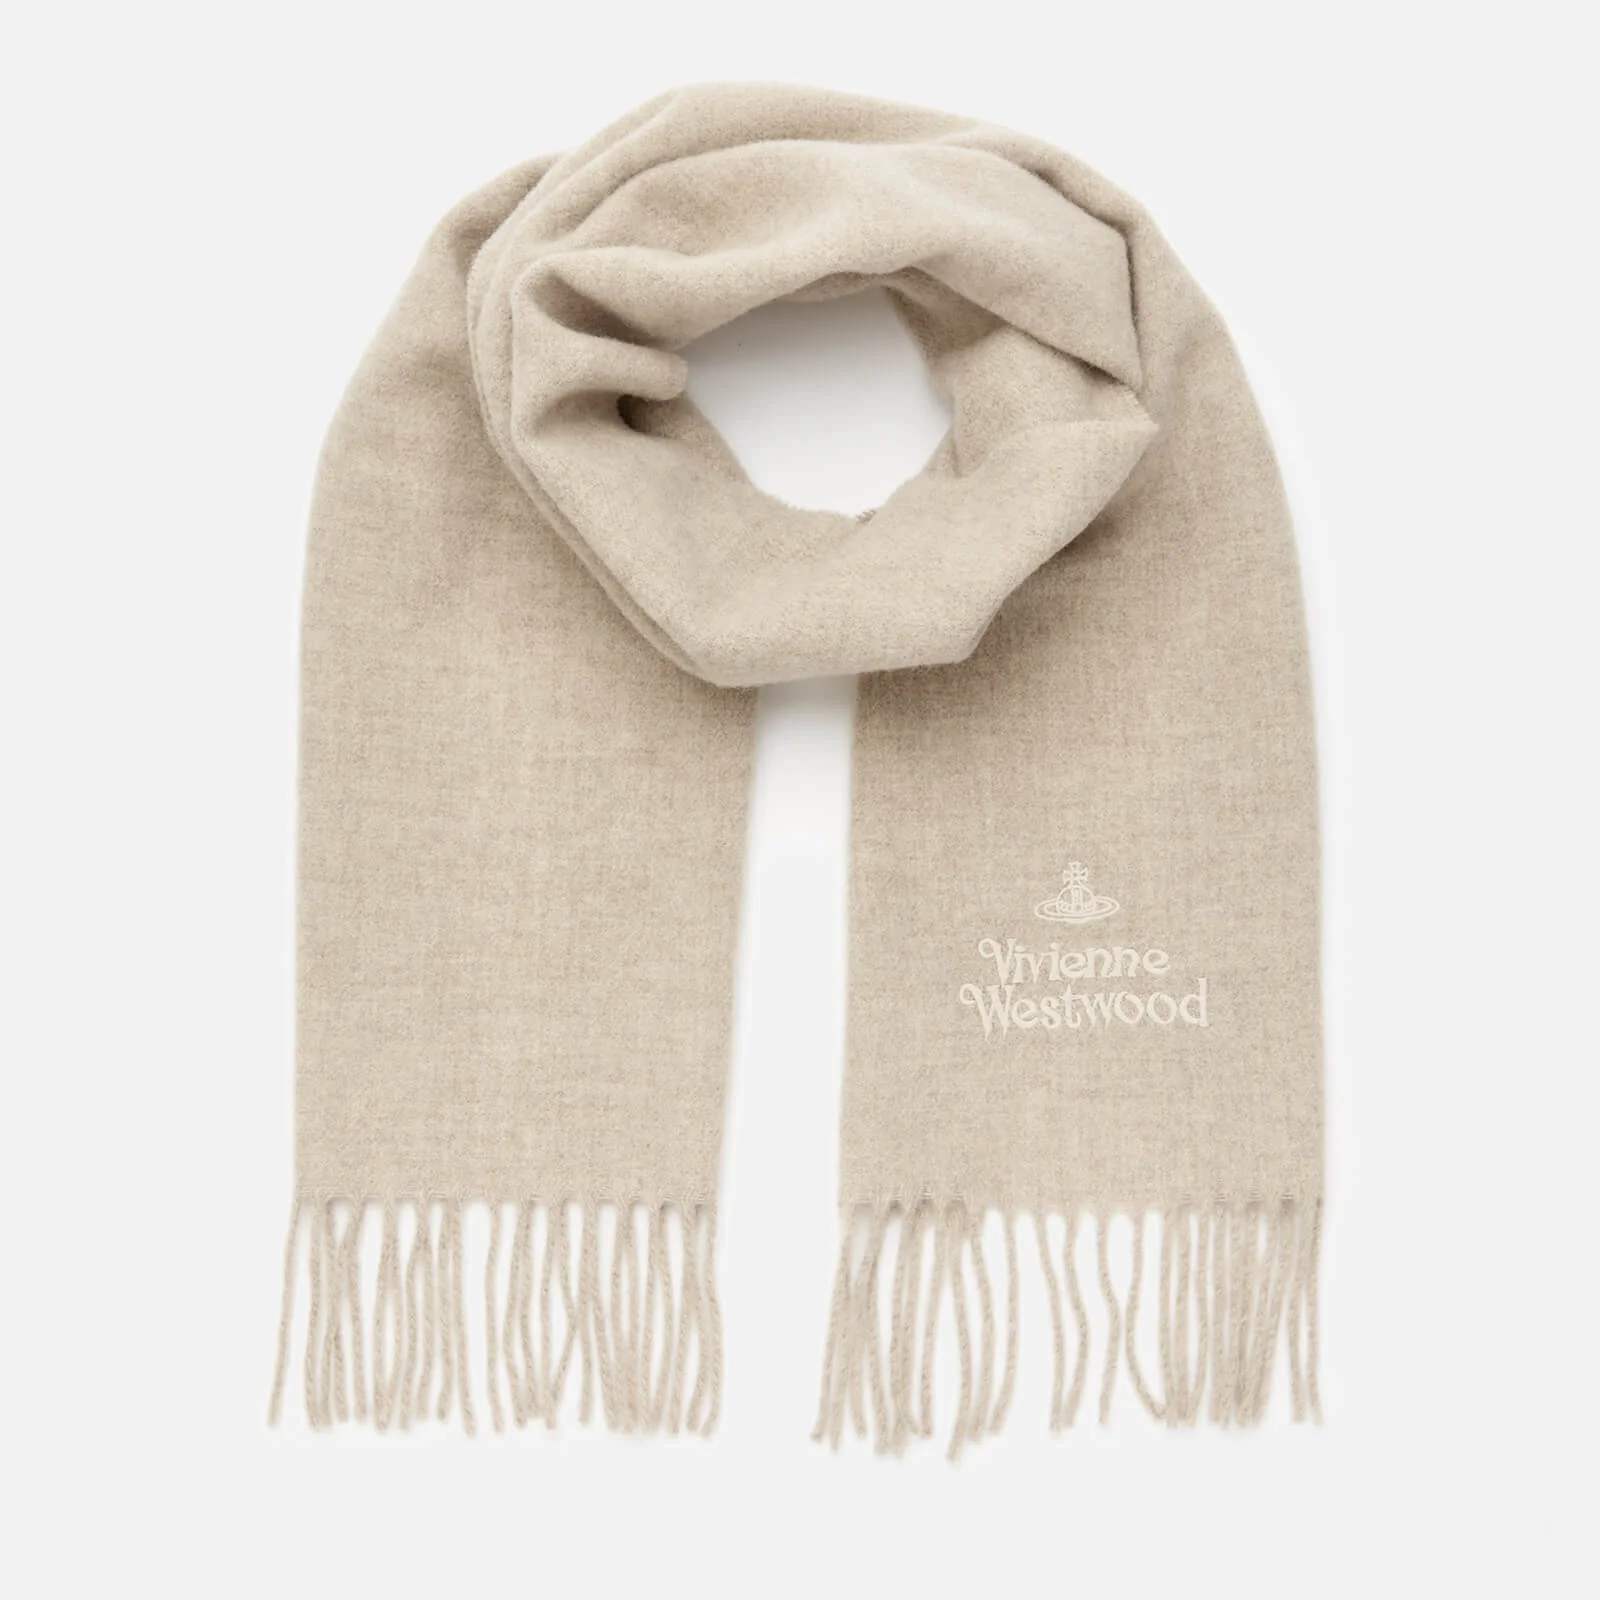 Vivienne Westwood Women's Wool Embroidered Scarf - Natural Image 1